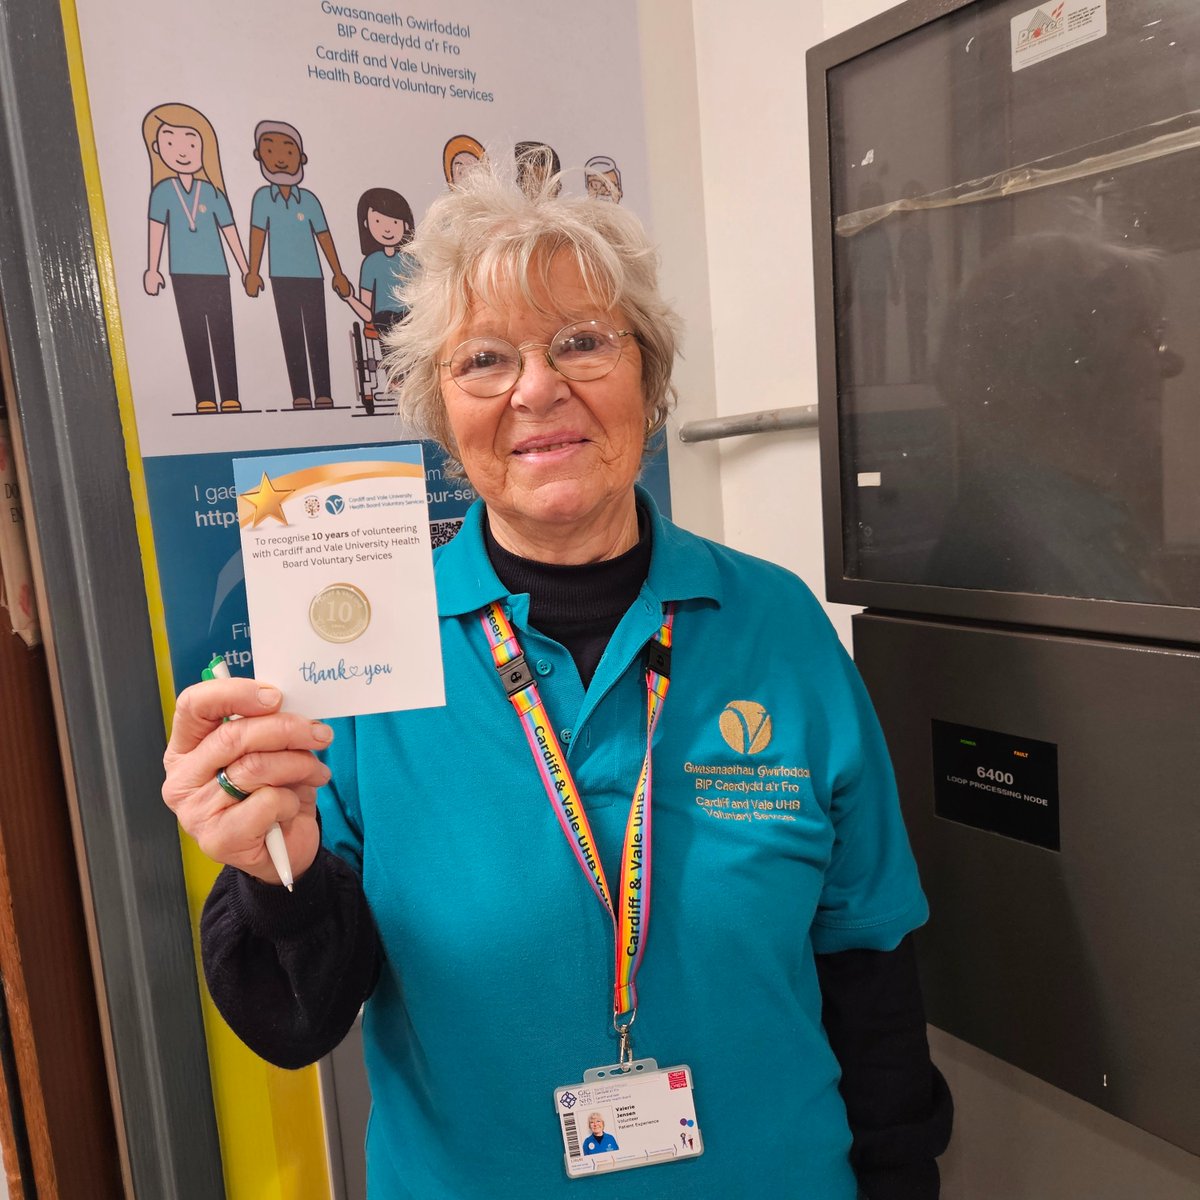 ✨A big thanks to Val who has been volunteering with us for 10 years🙌! She is currently part of the Welcome Team at UHW, who provide a friendly welcome to all patients, carers, visitors and staff visiting our hospitals🙂.